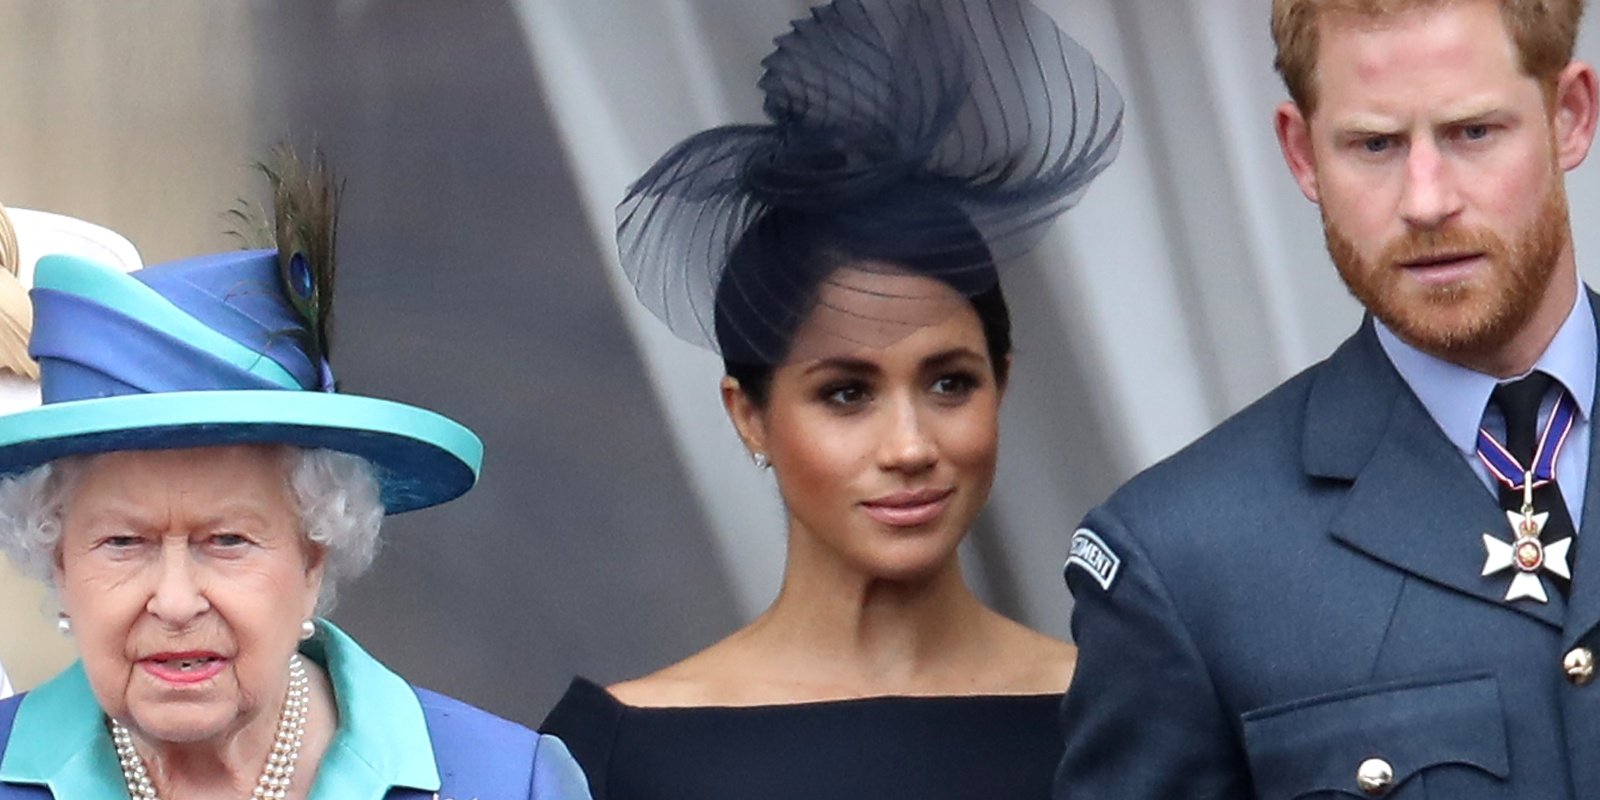 Queen Elizabeth, Meghan Markle, and Prince Harry appear on the Buckingham Palace balcony in 2018.